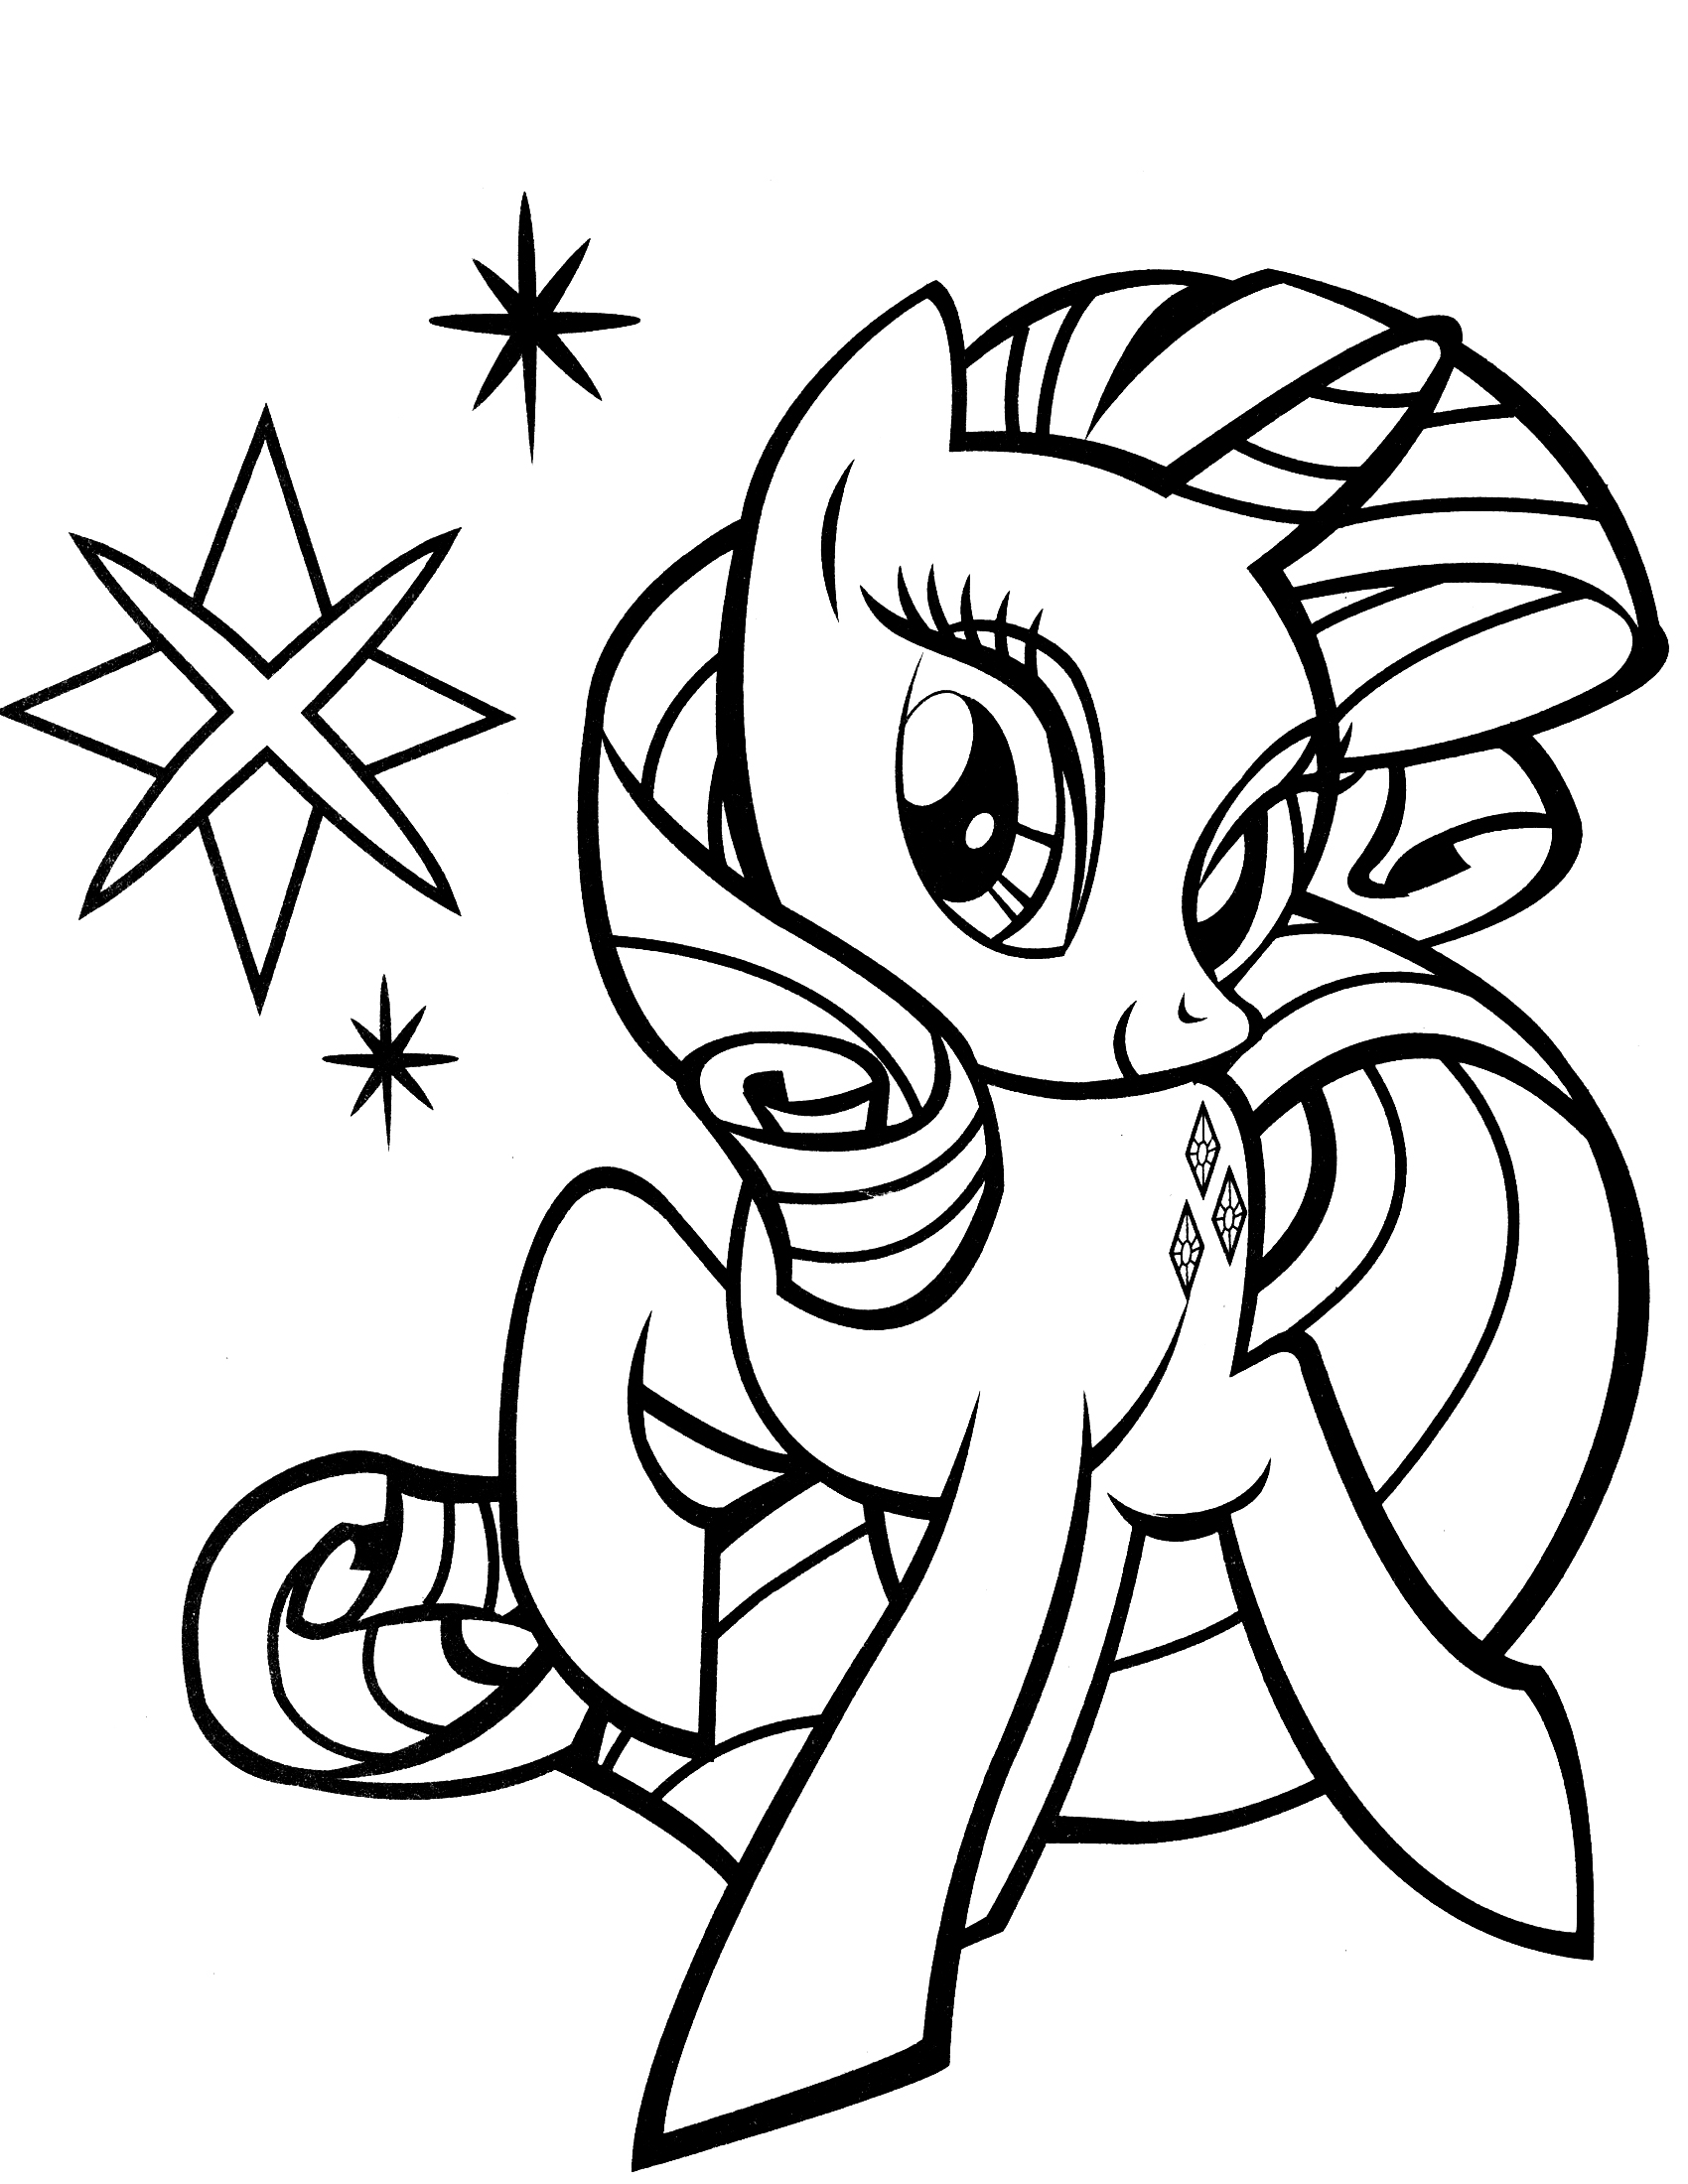 My Little Pony Coloring Book +100 Pages, Coloring Pages Printable for kids